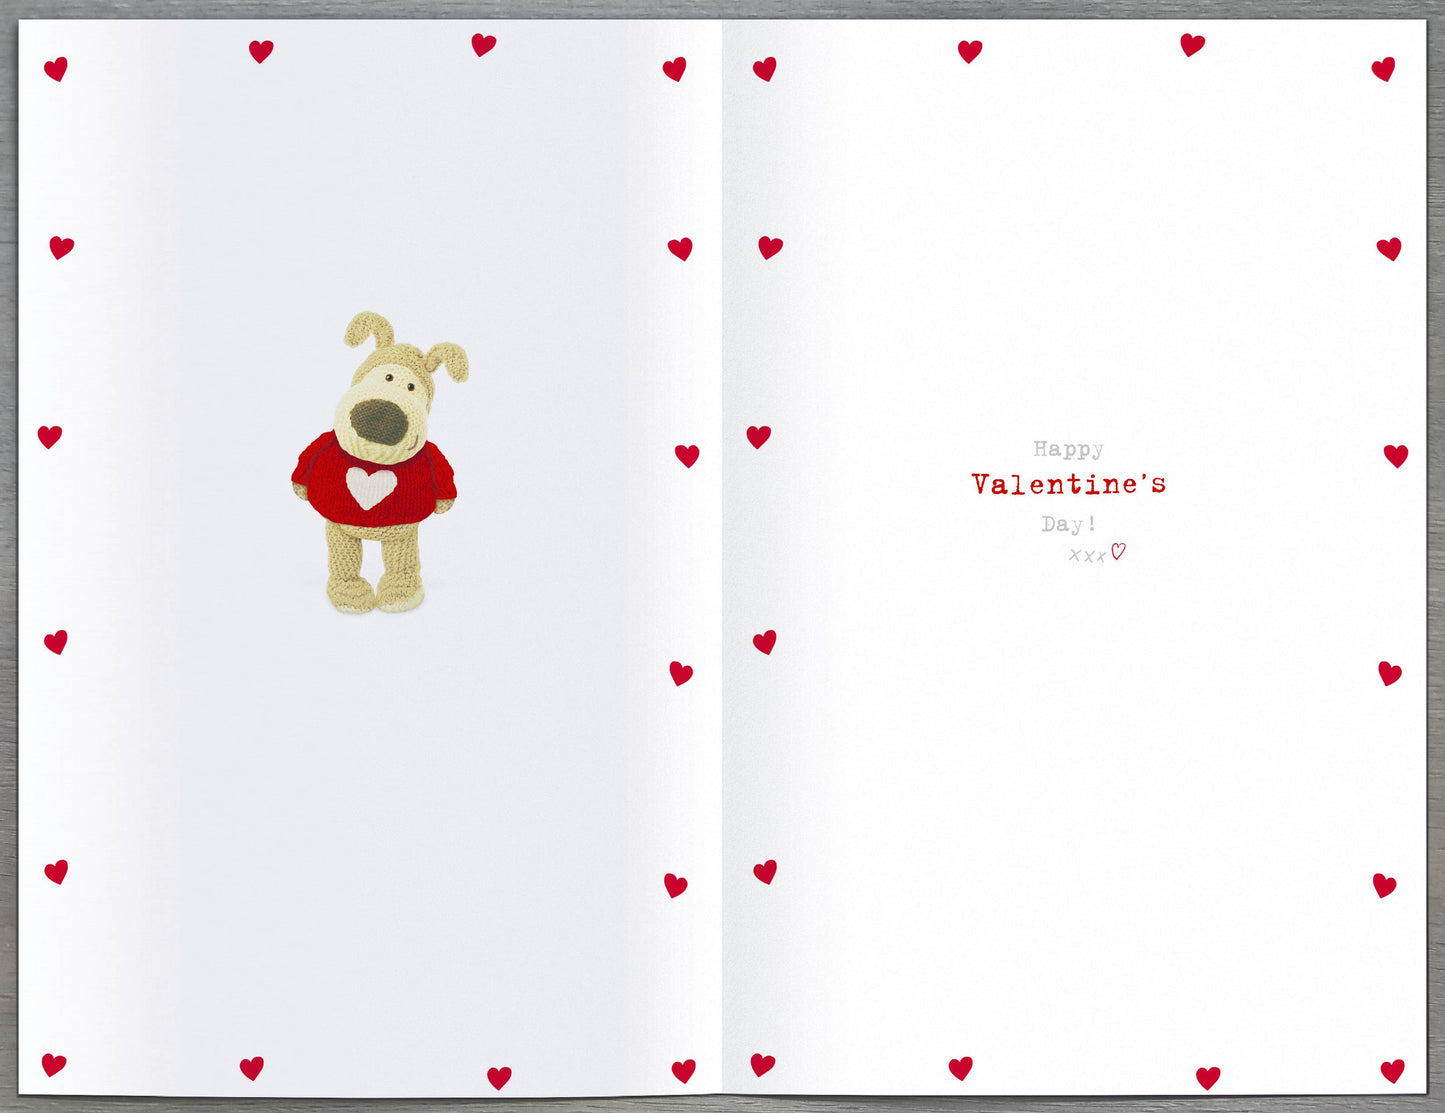 Boofle You're Gorgeous! Valentine's Day Card